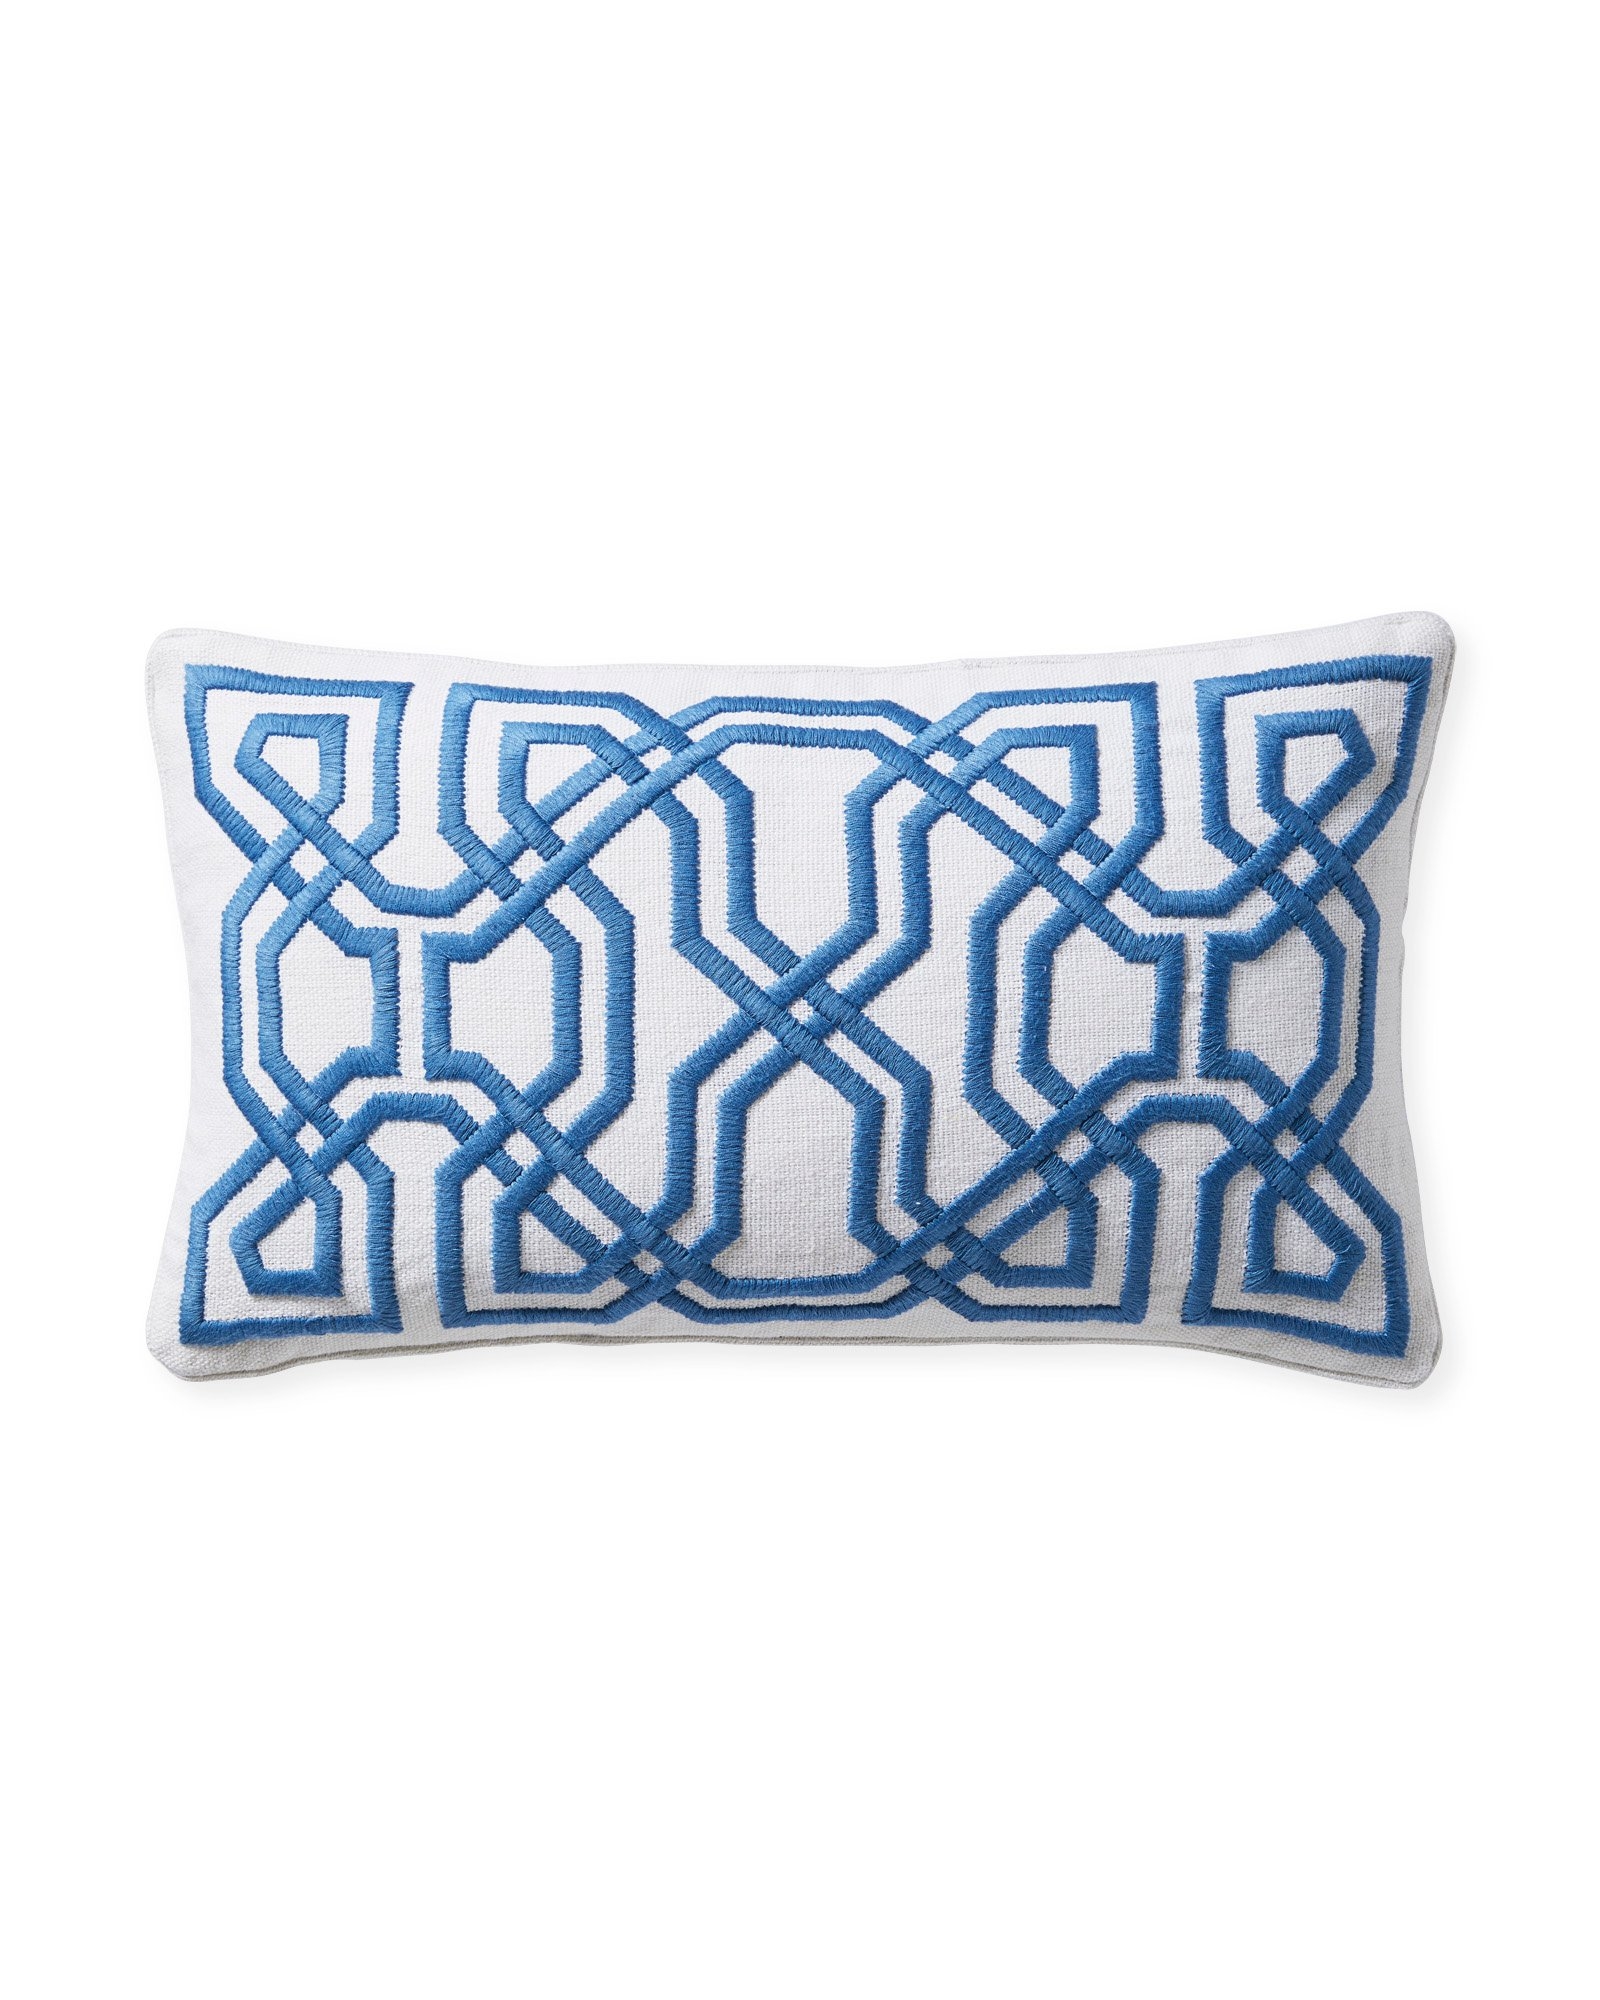 Jetty Pillow Cover - Harbor - Insert sold separately - Image 0